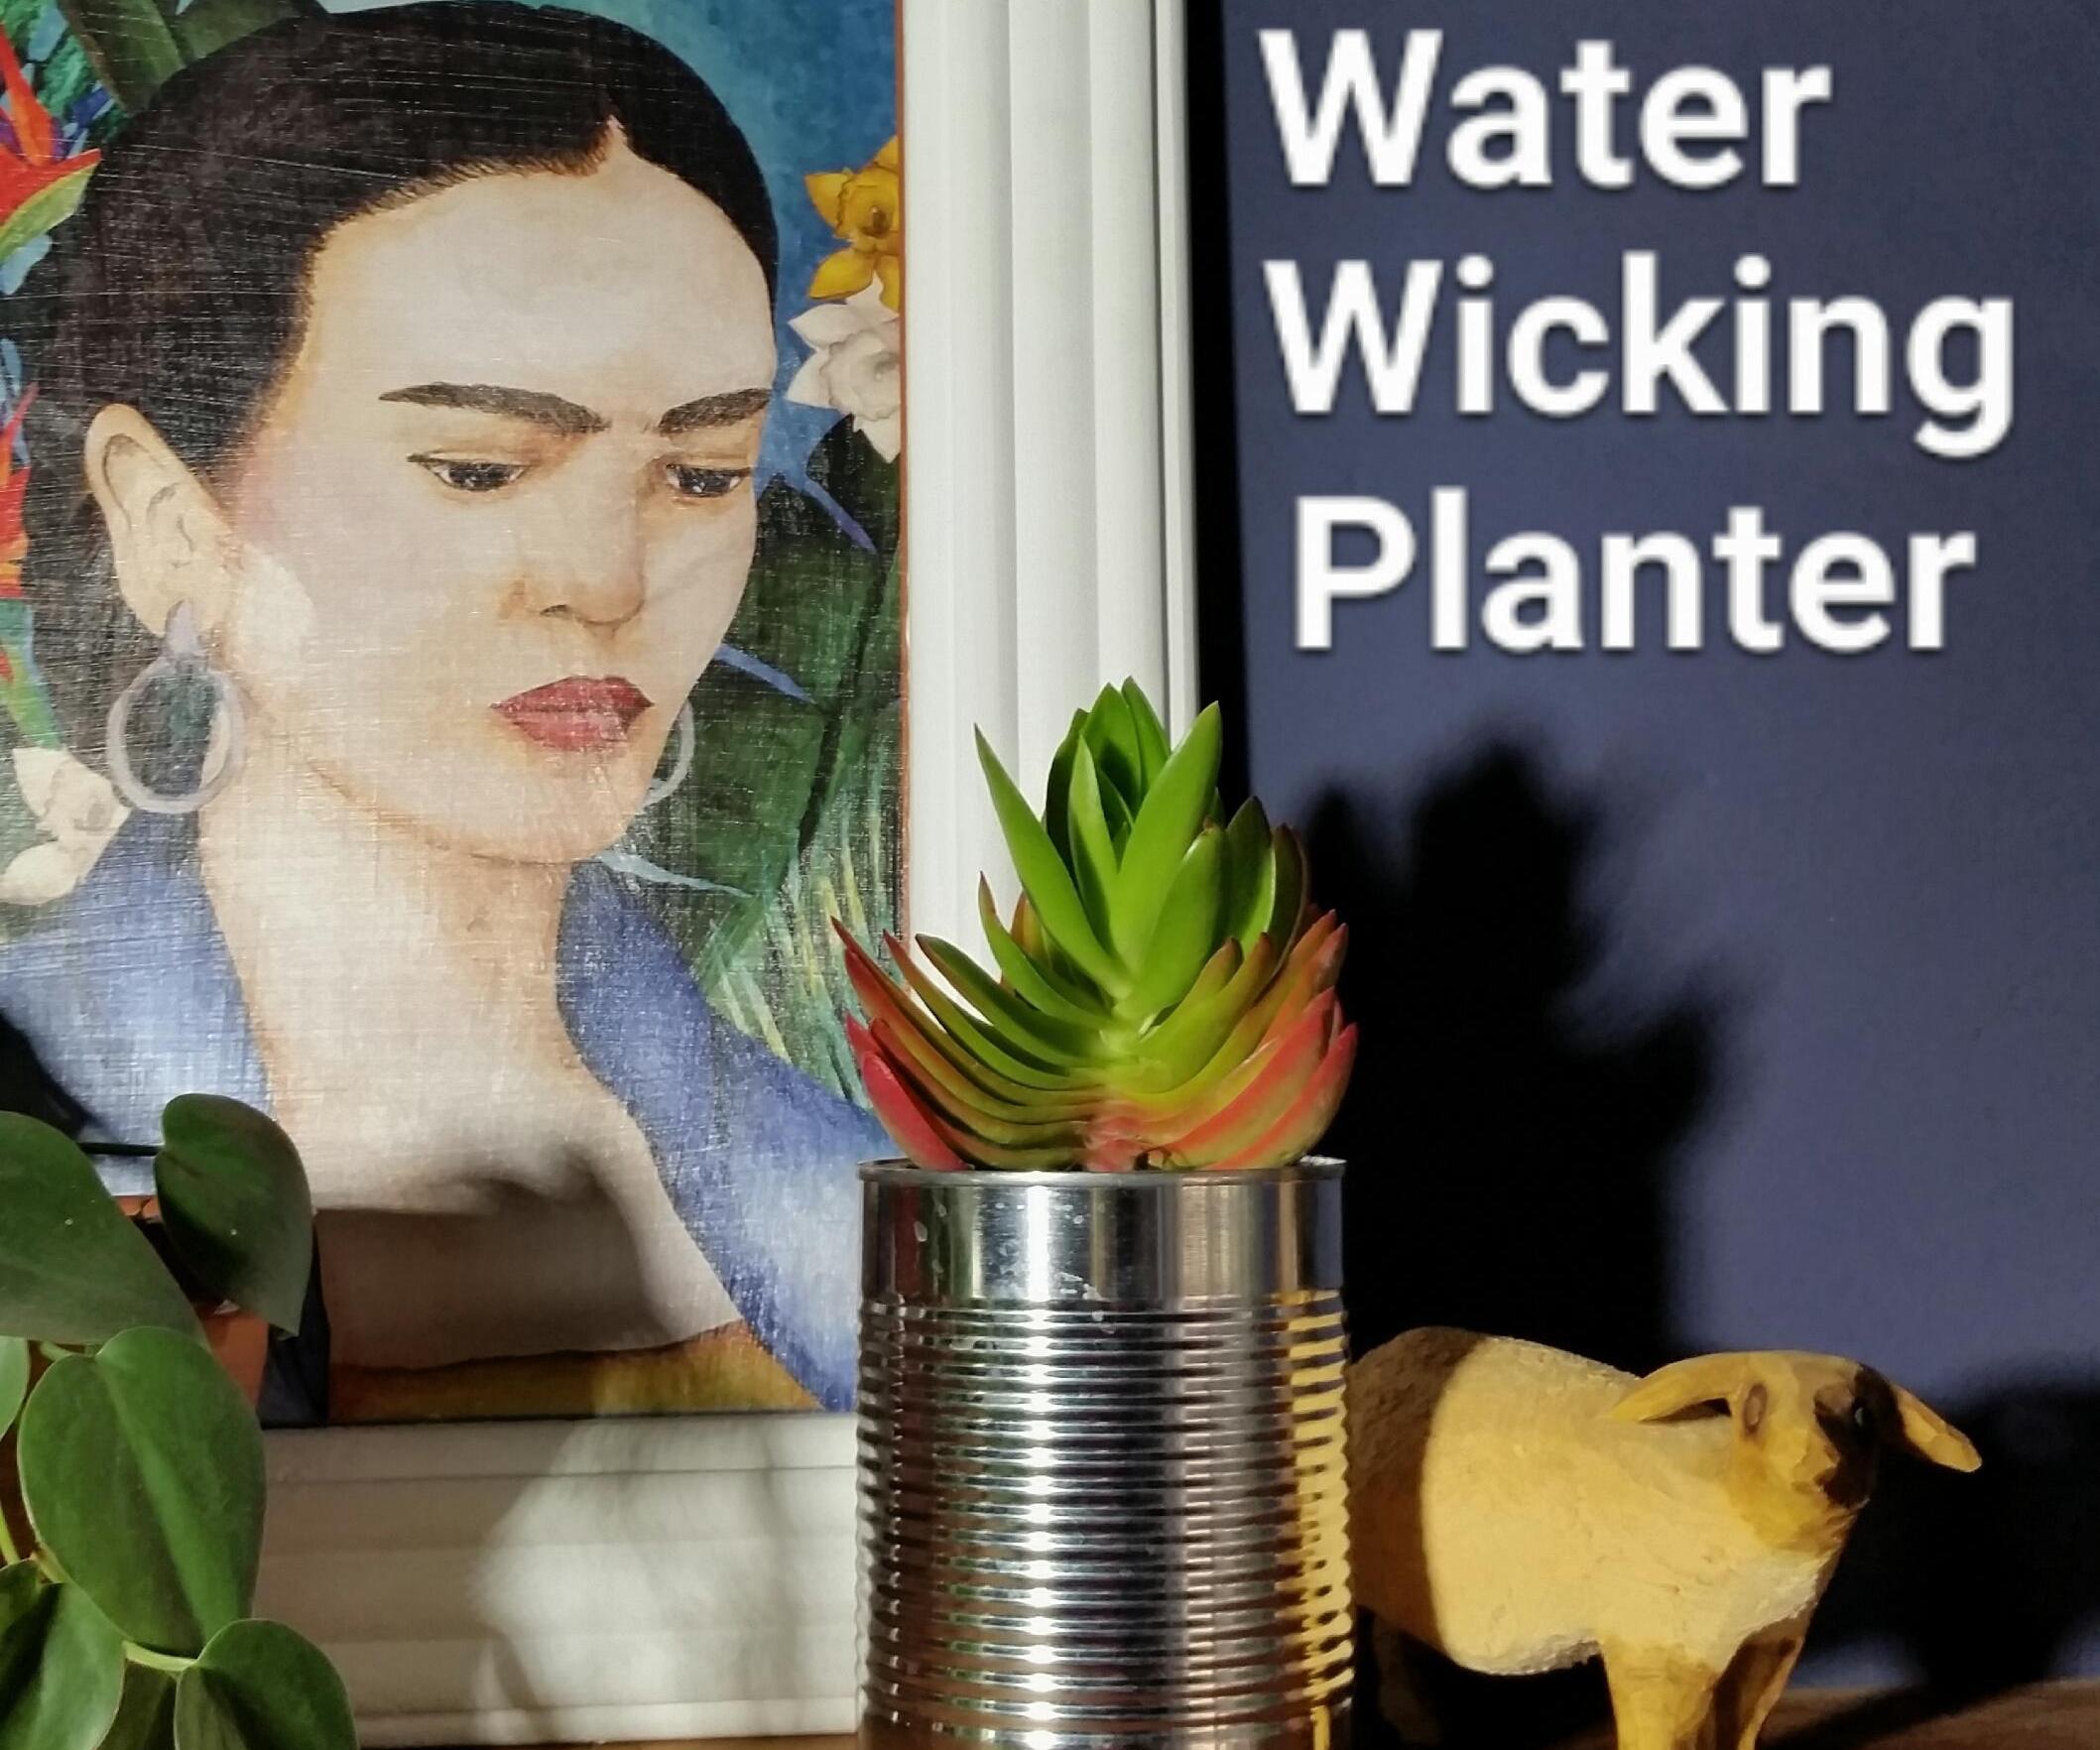 Upcycled Self Watering Planter